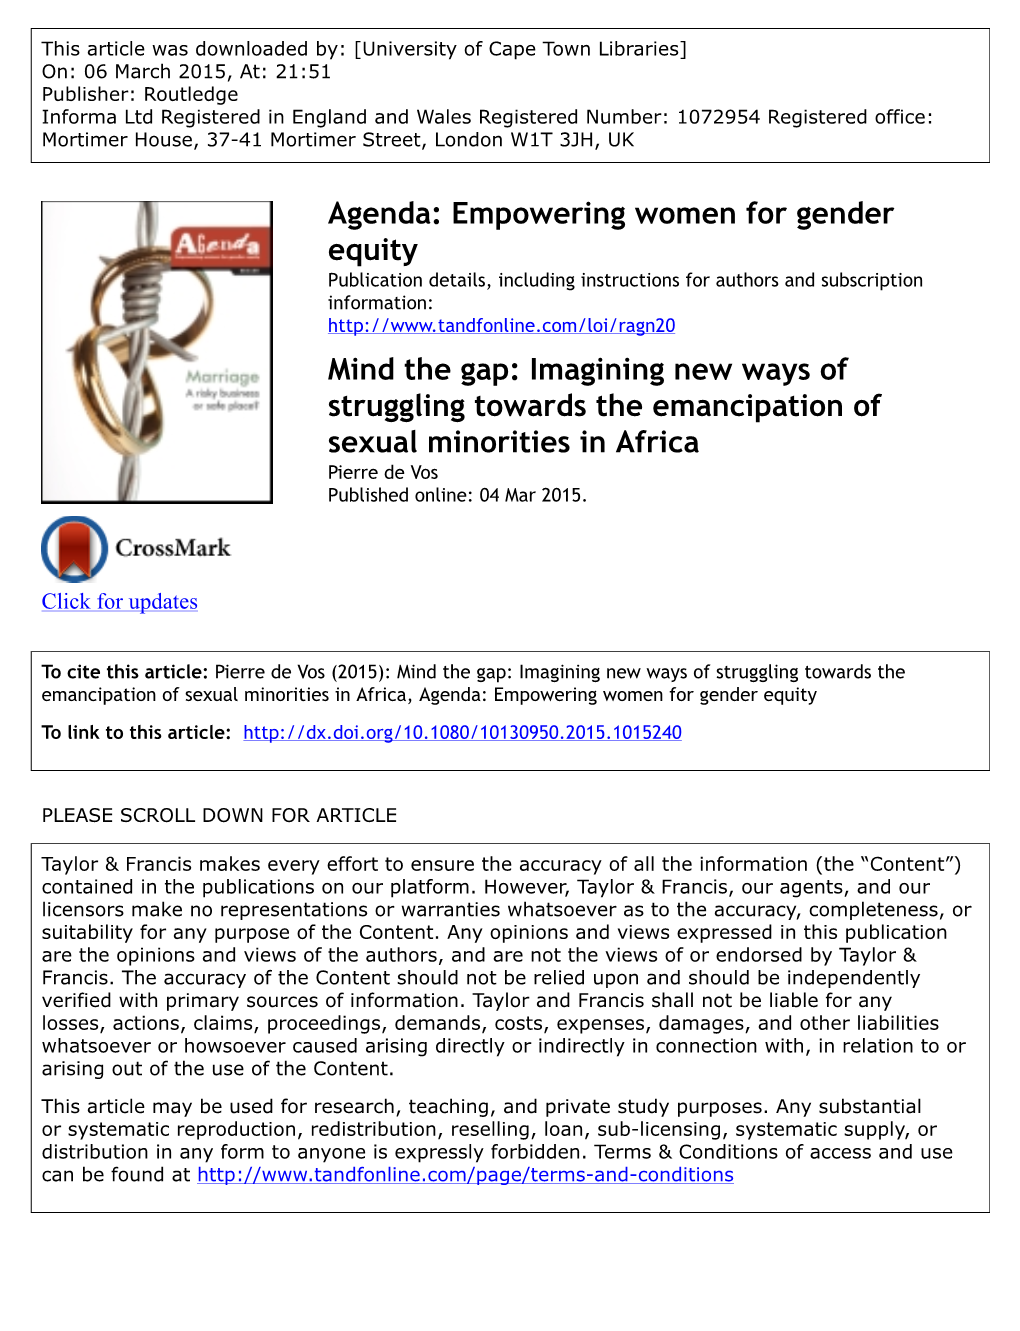 Mind the Gap: Imagining New Ways of Struggling Towards the Emancipation of Sexual Minorities in Africa Pierre De Vos Published Online: 04 Mar 2015